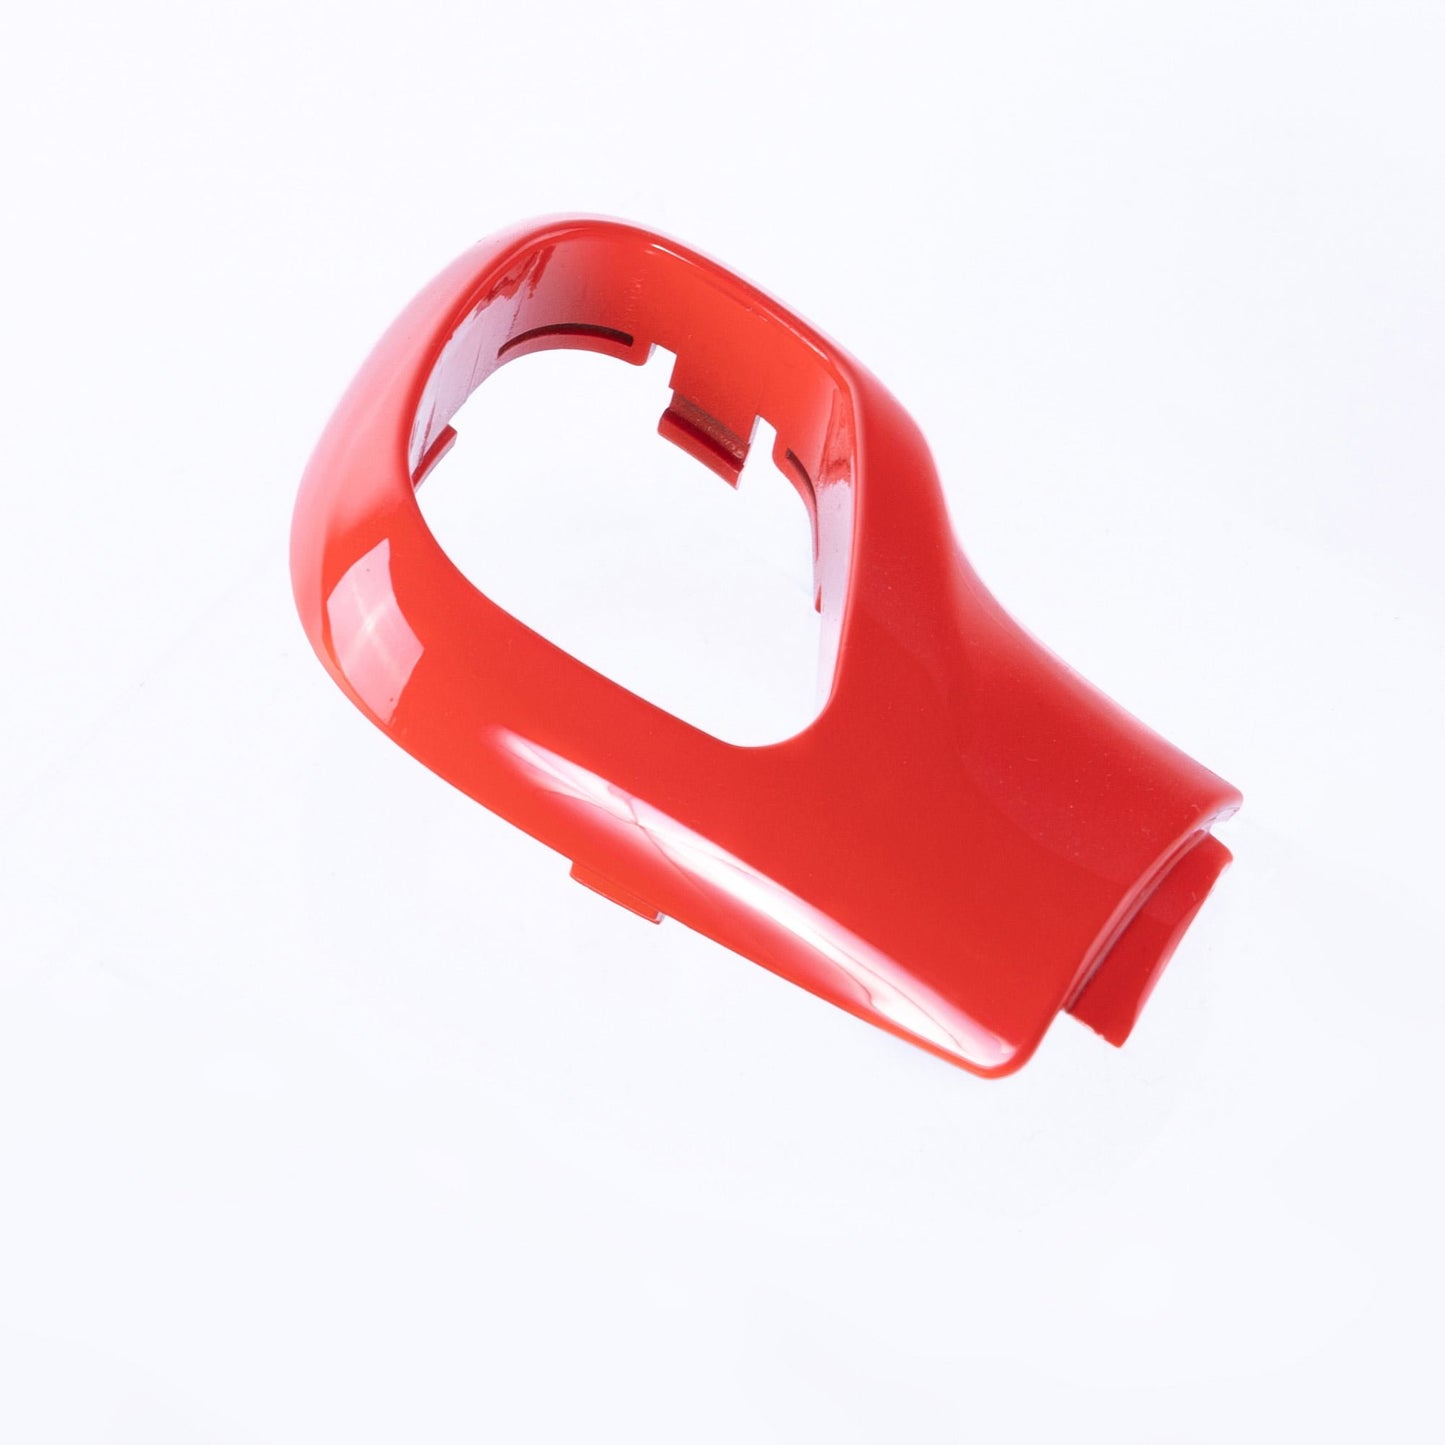 VW T5.1 Transporter Auto/DSG Gear Knob Side Styling Caps - Red Painted and Ready to Fit